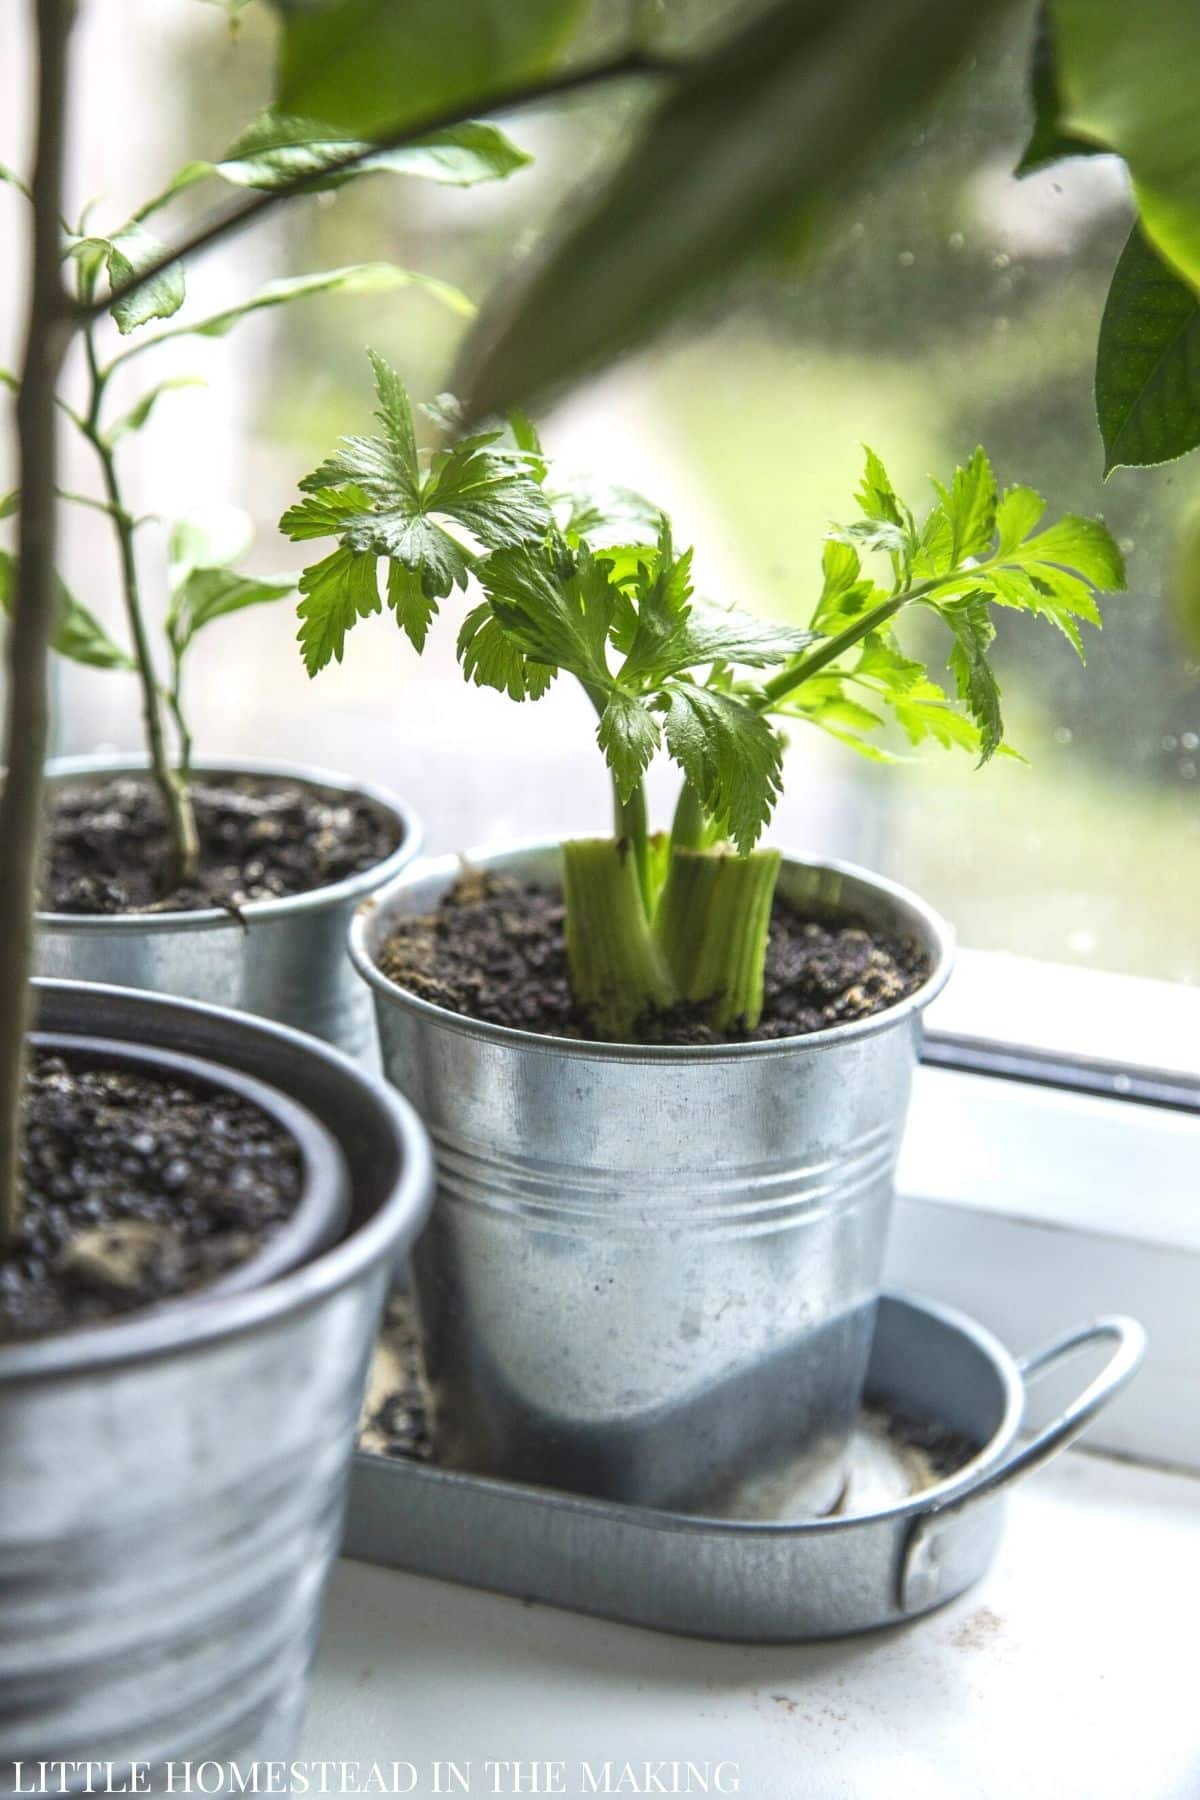 Celery regrowing from scraps in containers.